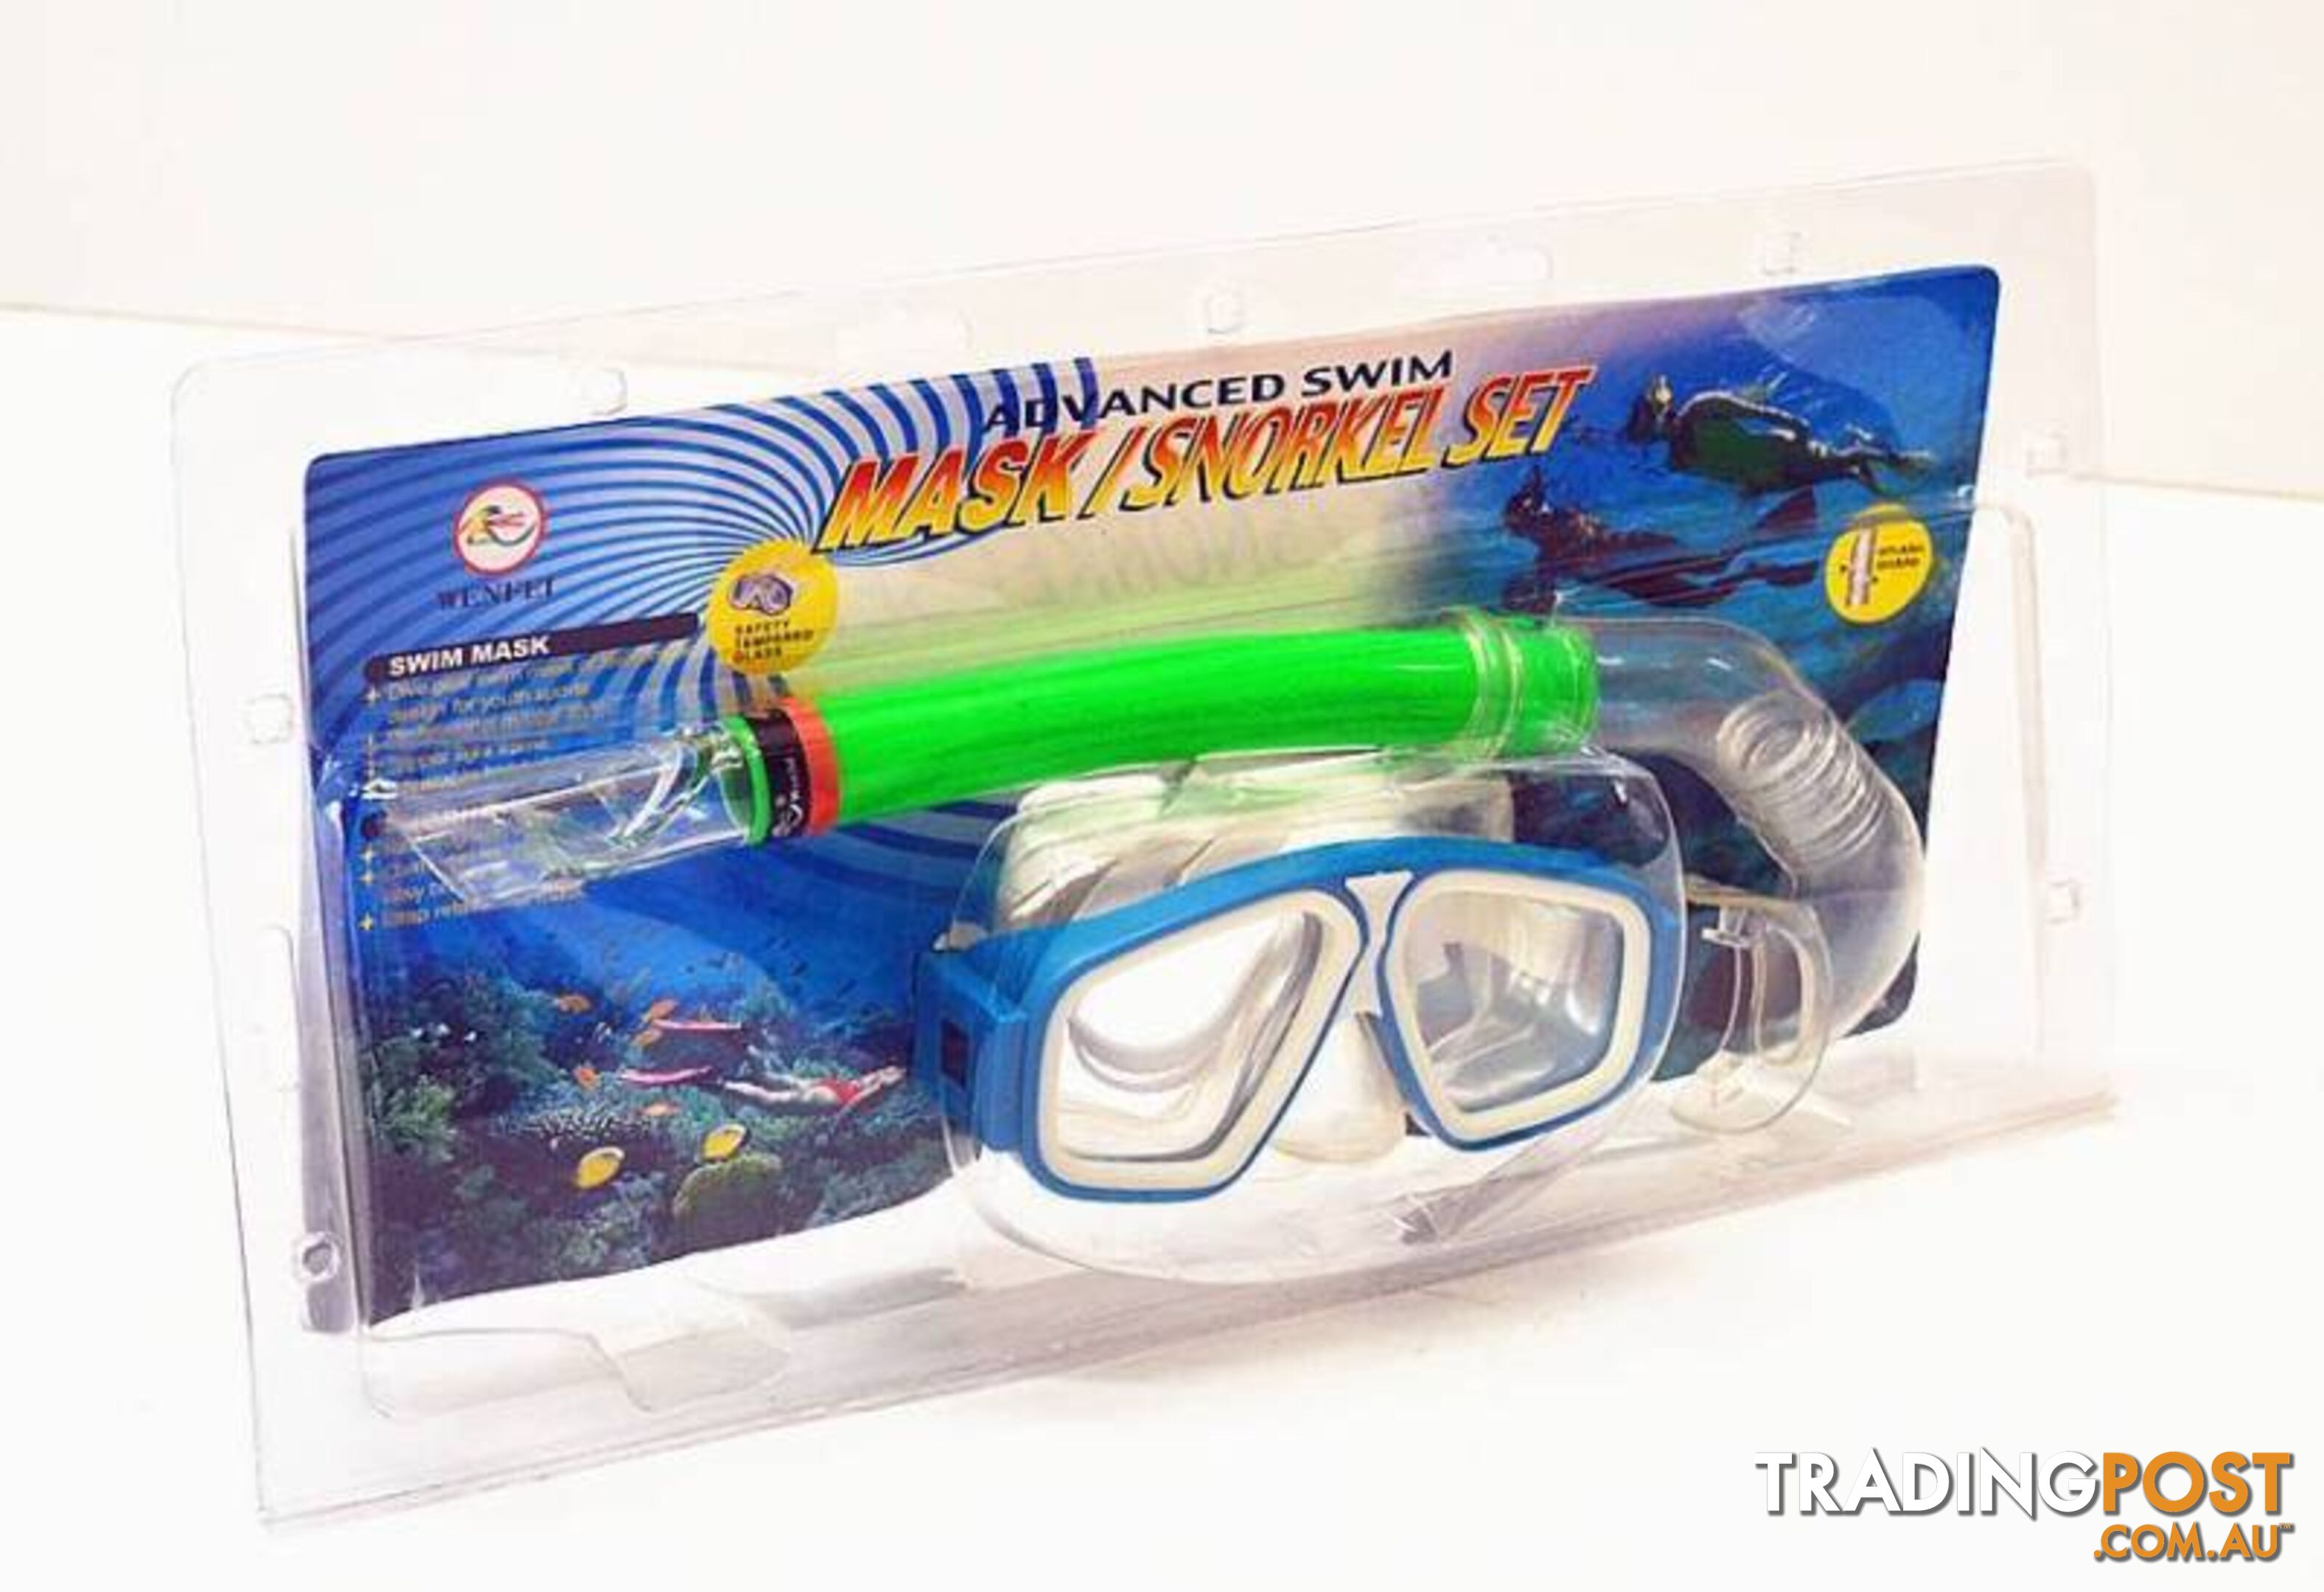 KIDS REALISTIC ARCHERY & FISHING SETS. From: $5